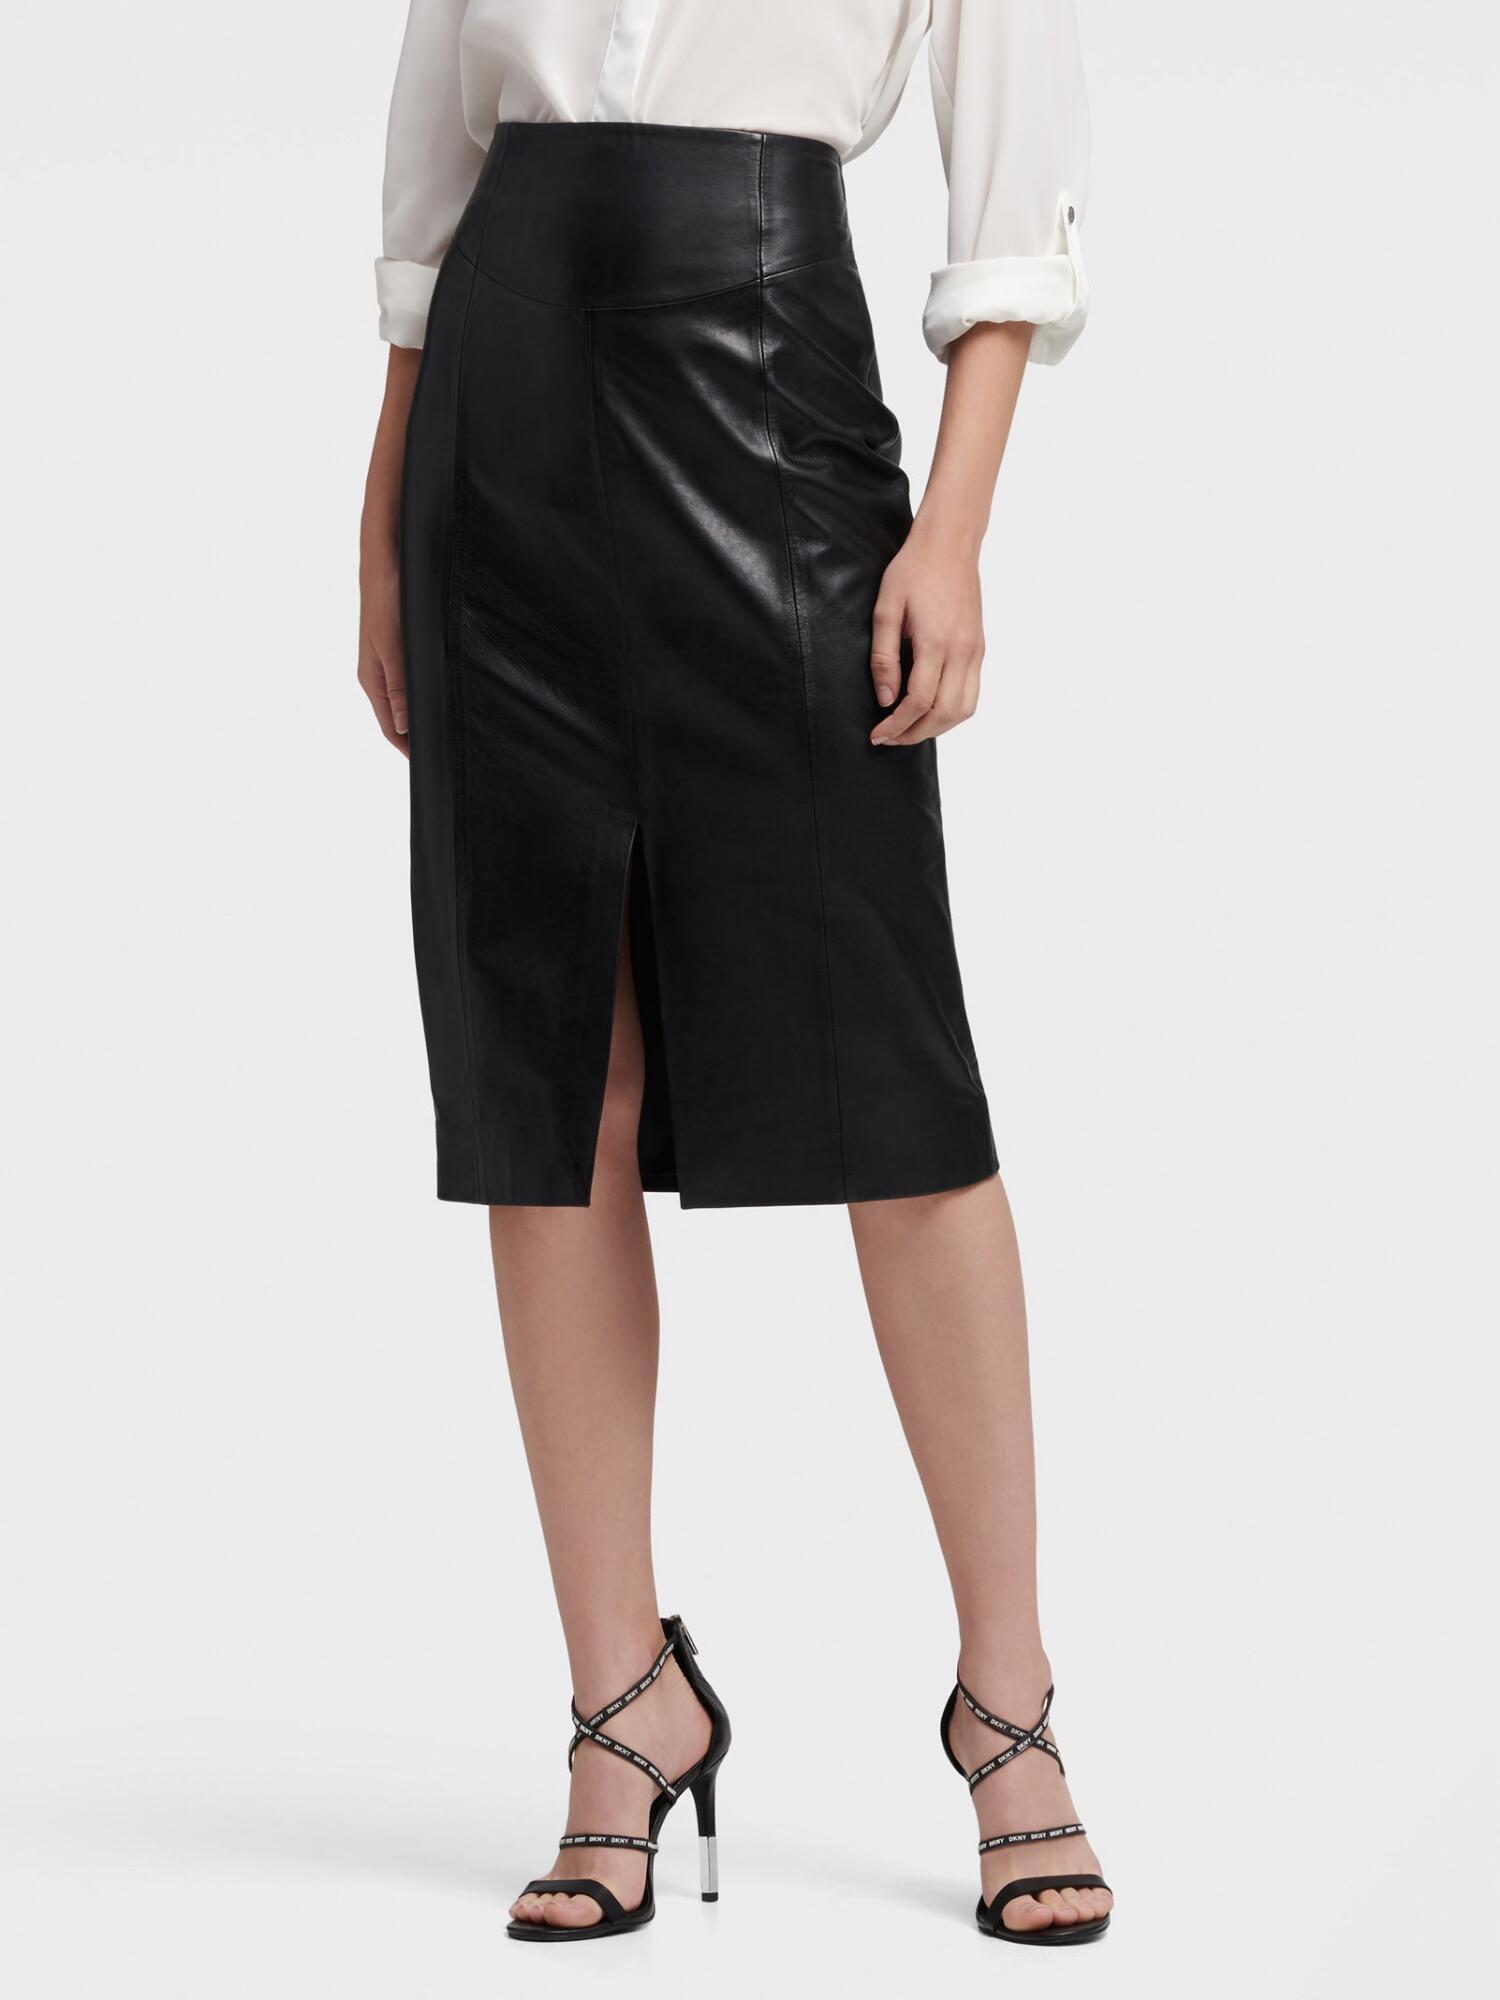 DKNY Leather Pencil Skirt in Black - Lyst